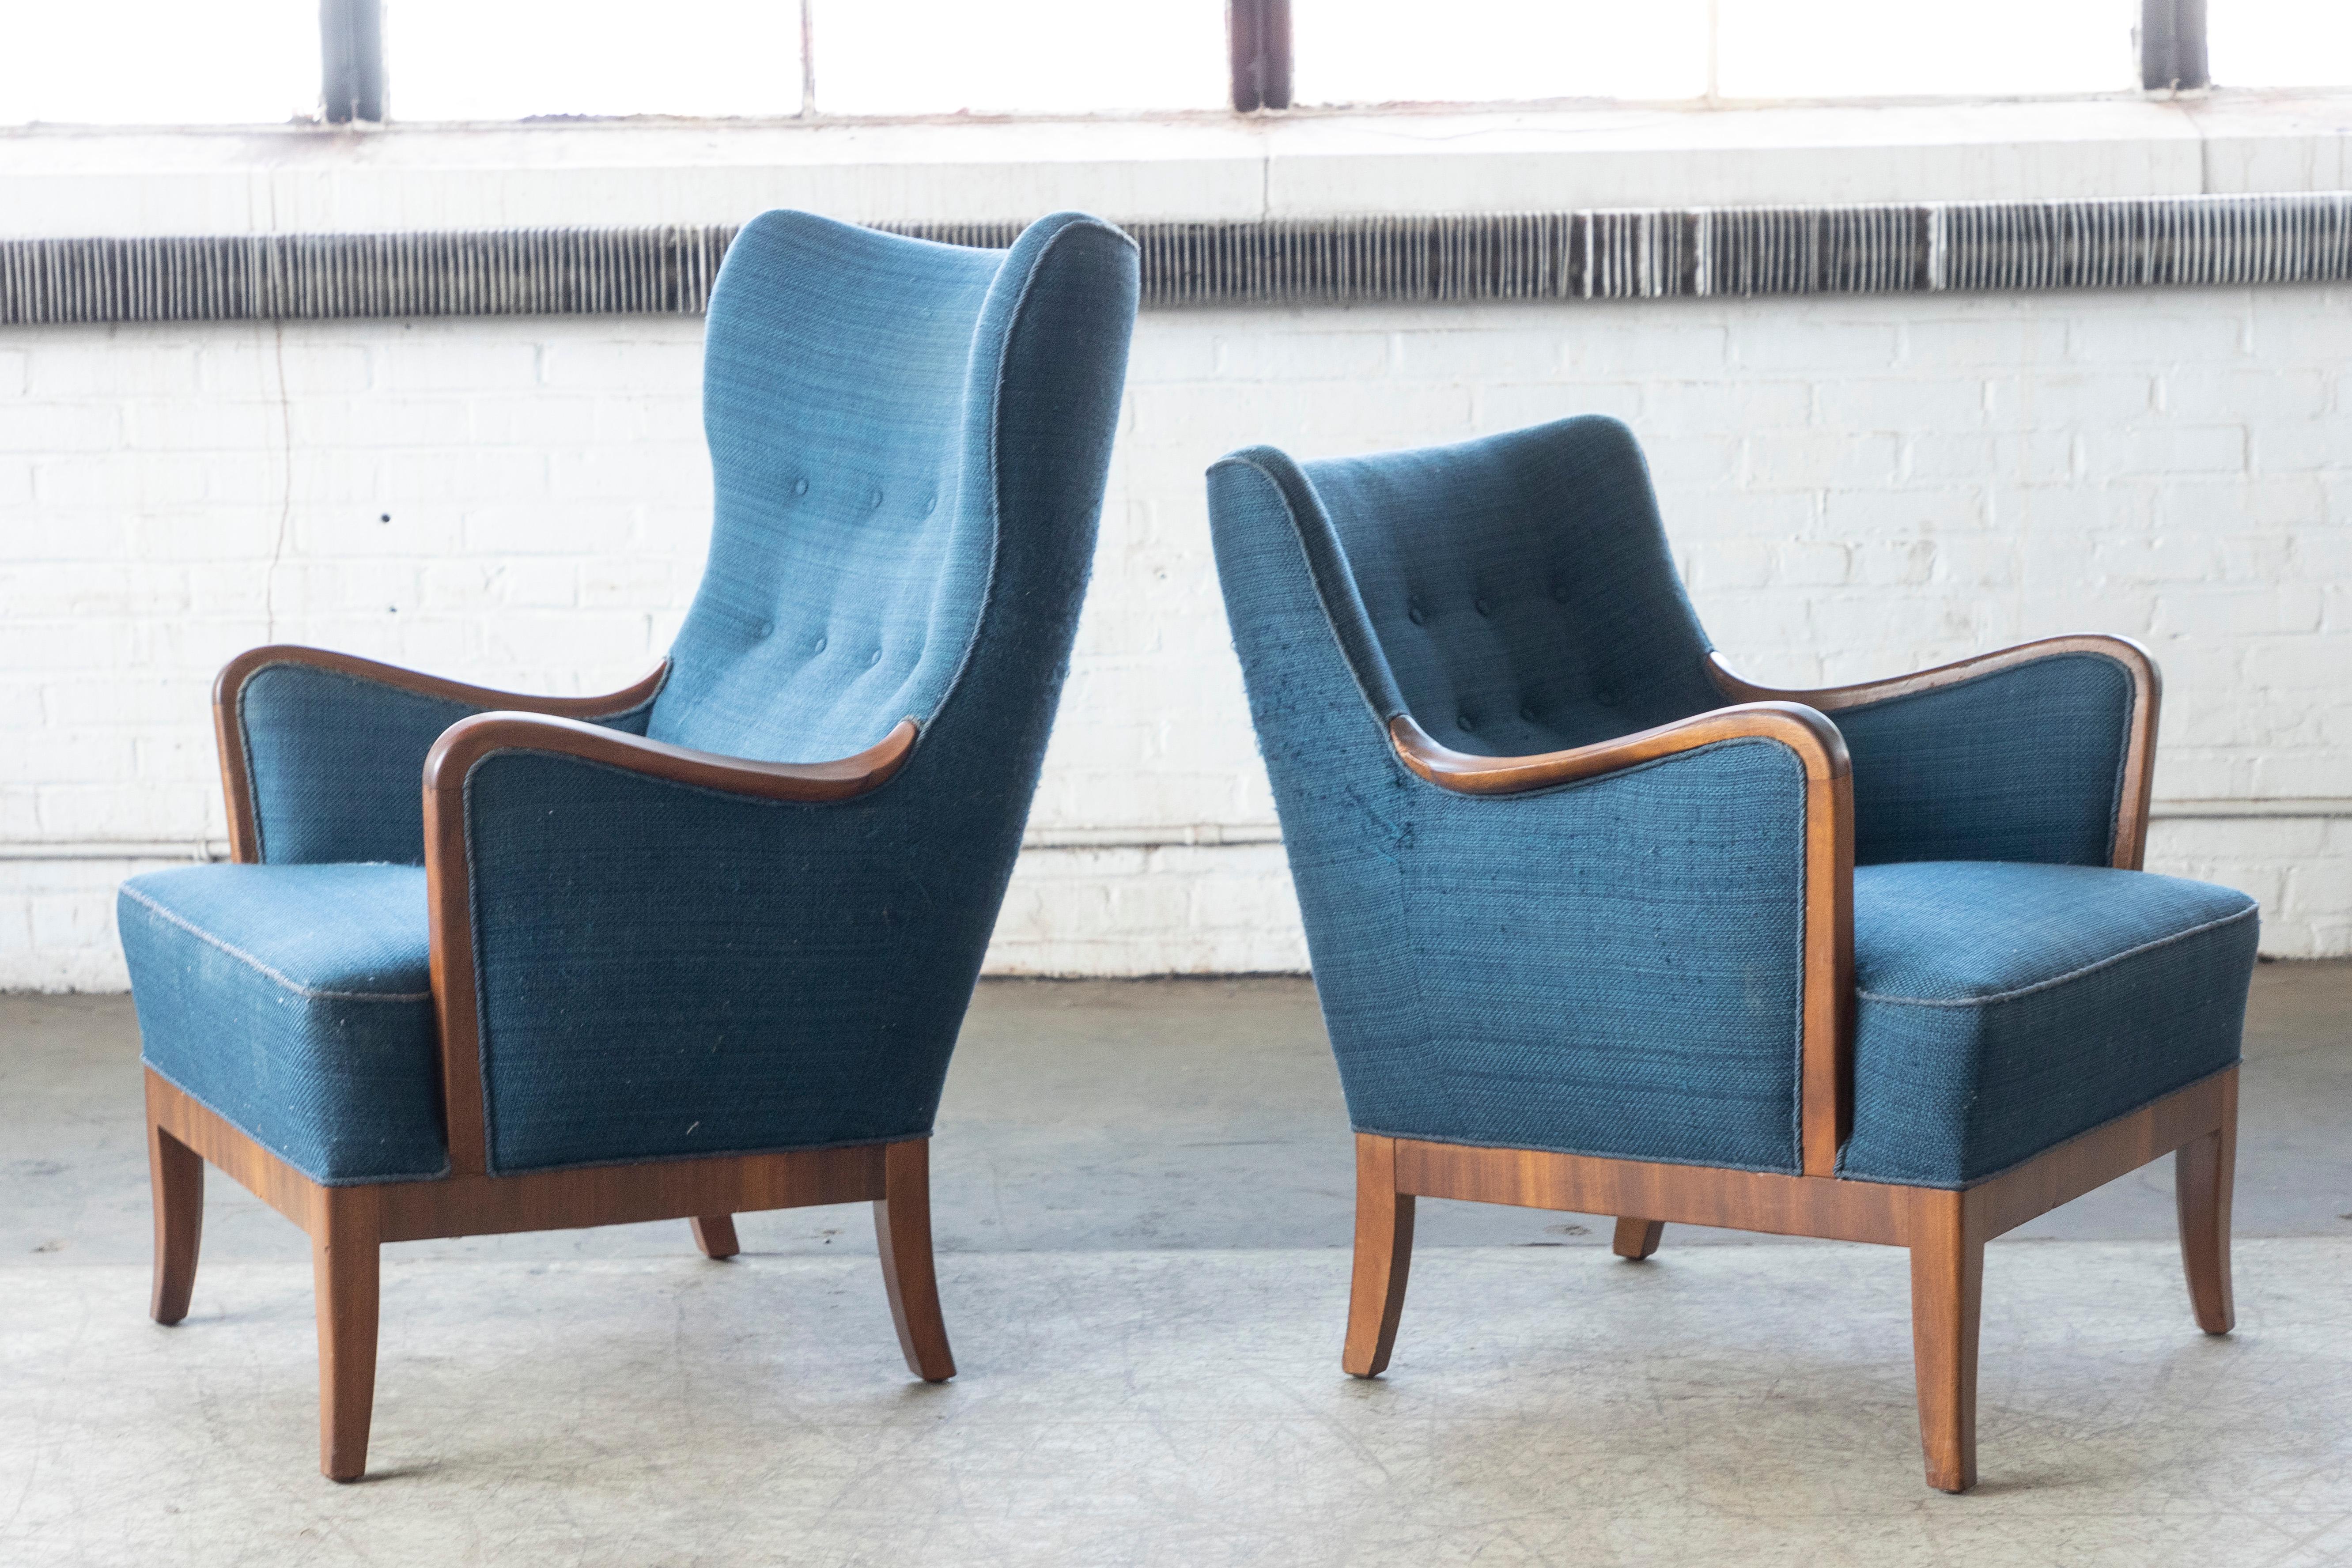 Pair of Danish Midcentury Lounge Chairs with Walnut Frames and Legs In Good Condition For Sale In Bridgeport, CT